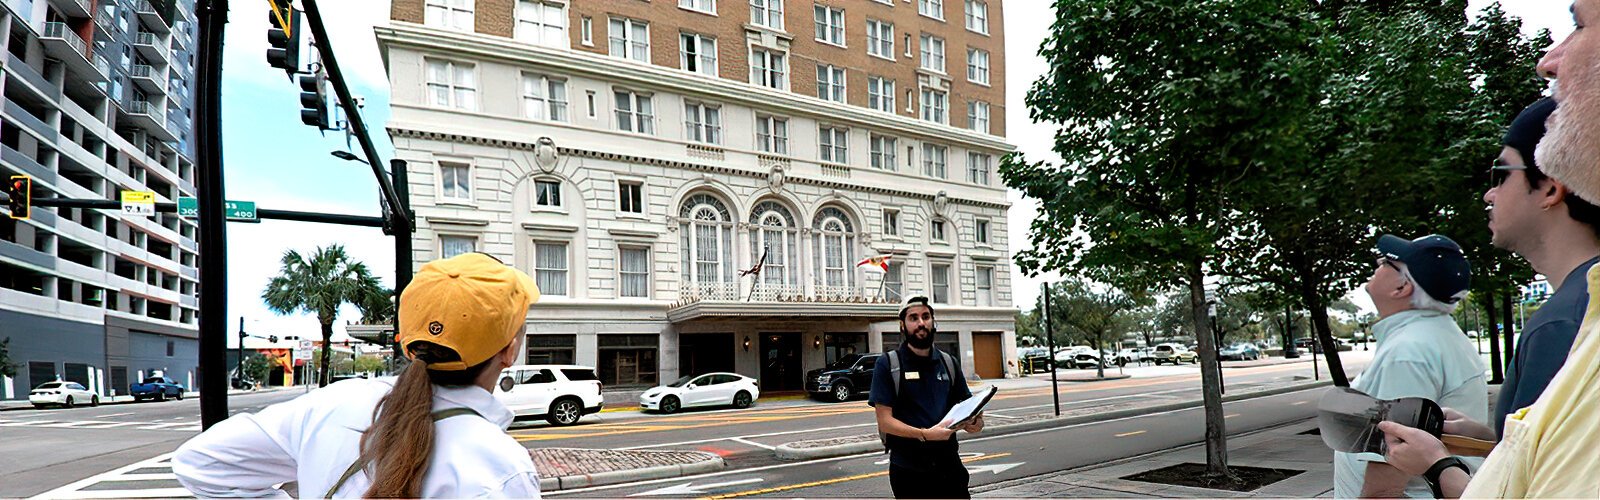 Opening in 1927, the Floridan Palace Hotel is Tampa’s only existing historic grand hotel. It has seen numerous celebrities such as Gary Cooper, Charlton Heston, Elvis Presley and others.